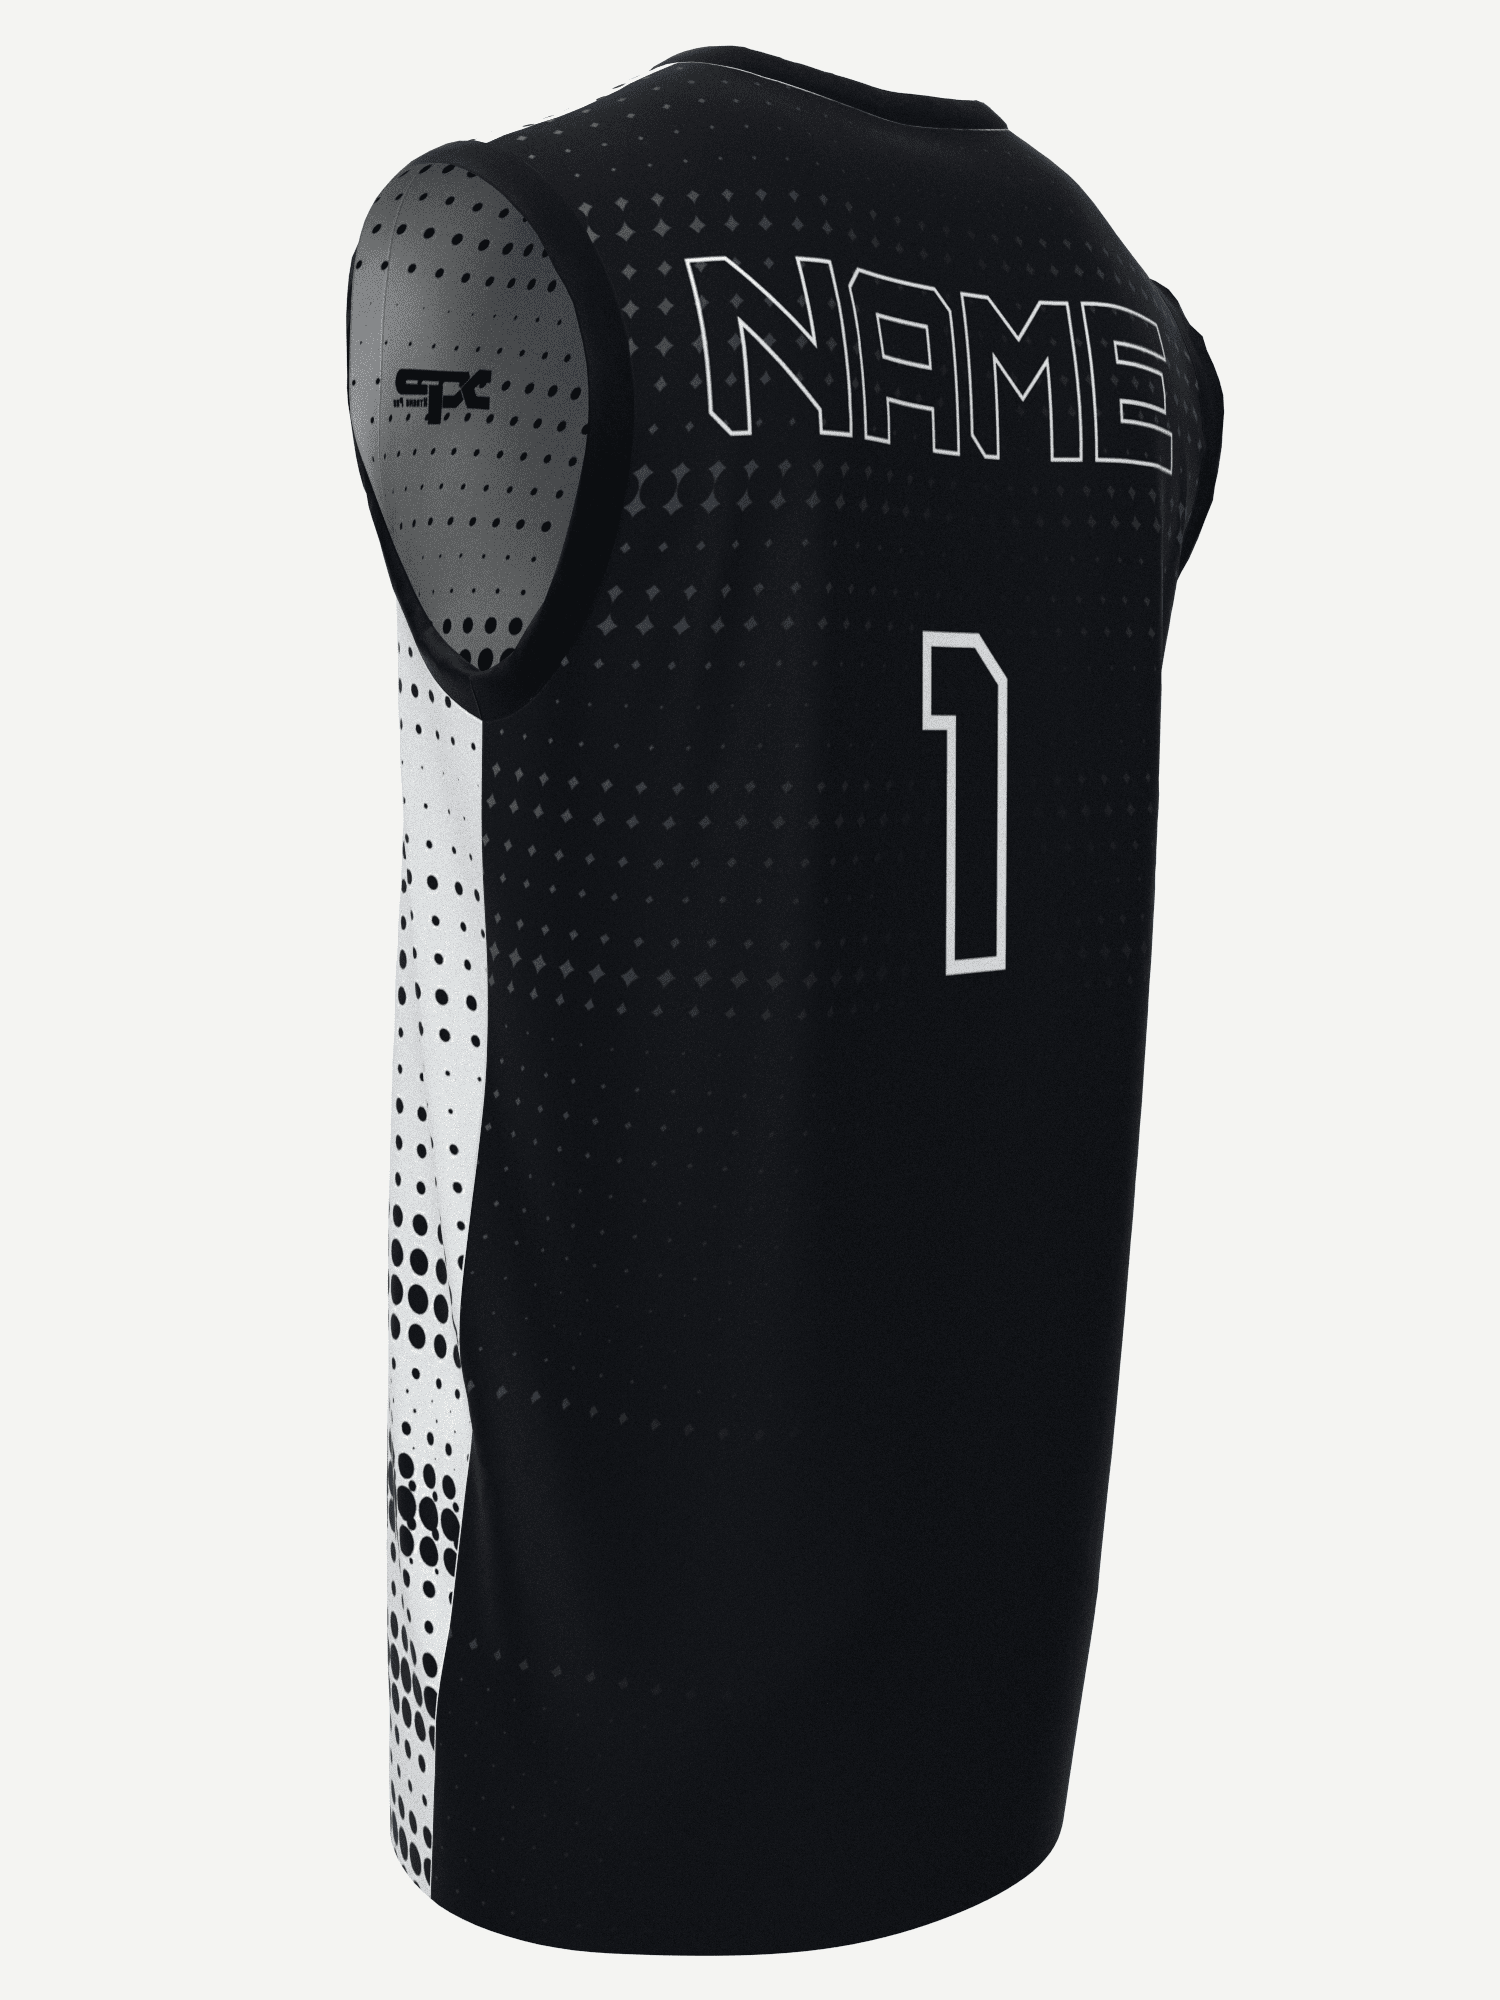 Halftone Speed Jersey in black and white Xtreme Pro Apparel